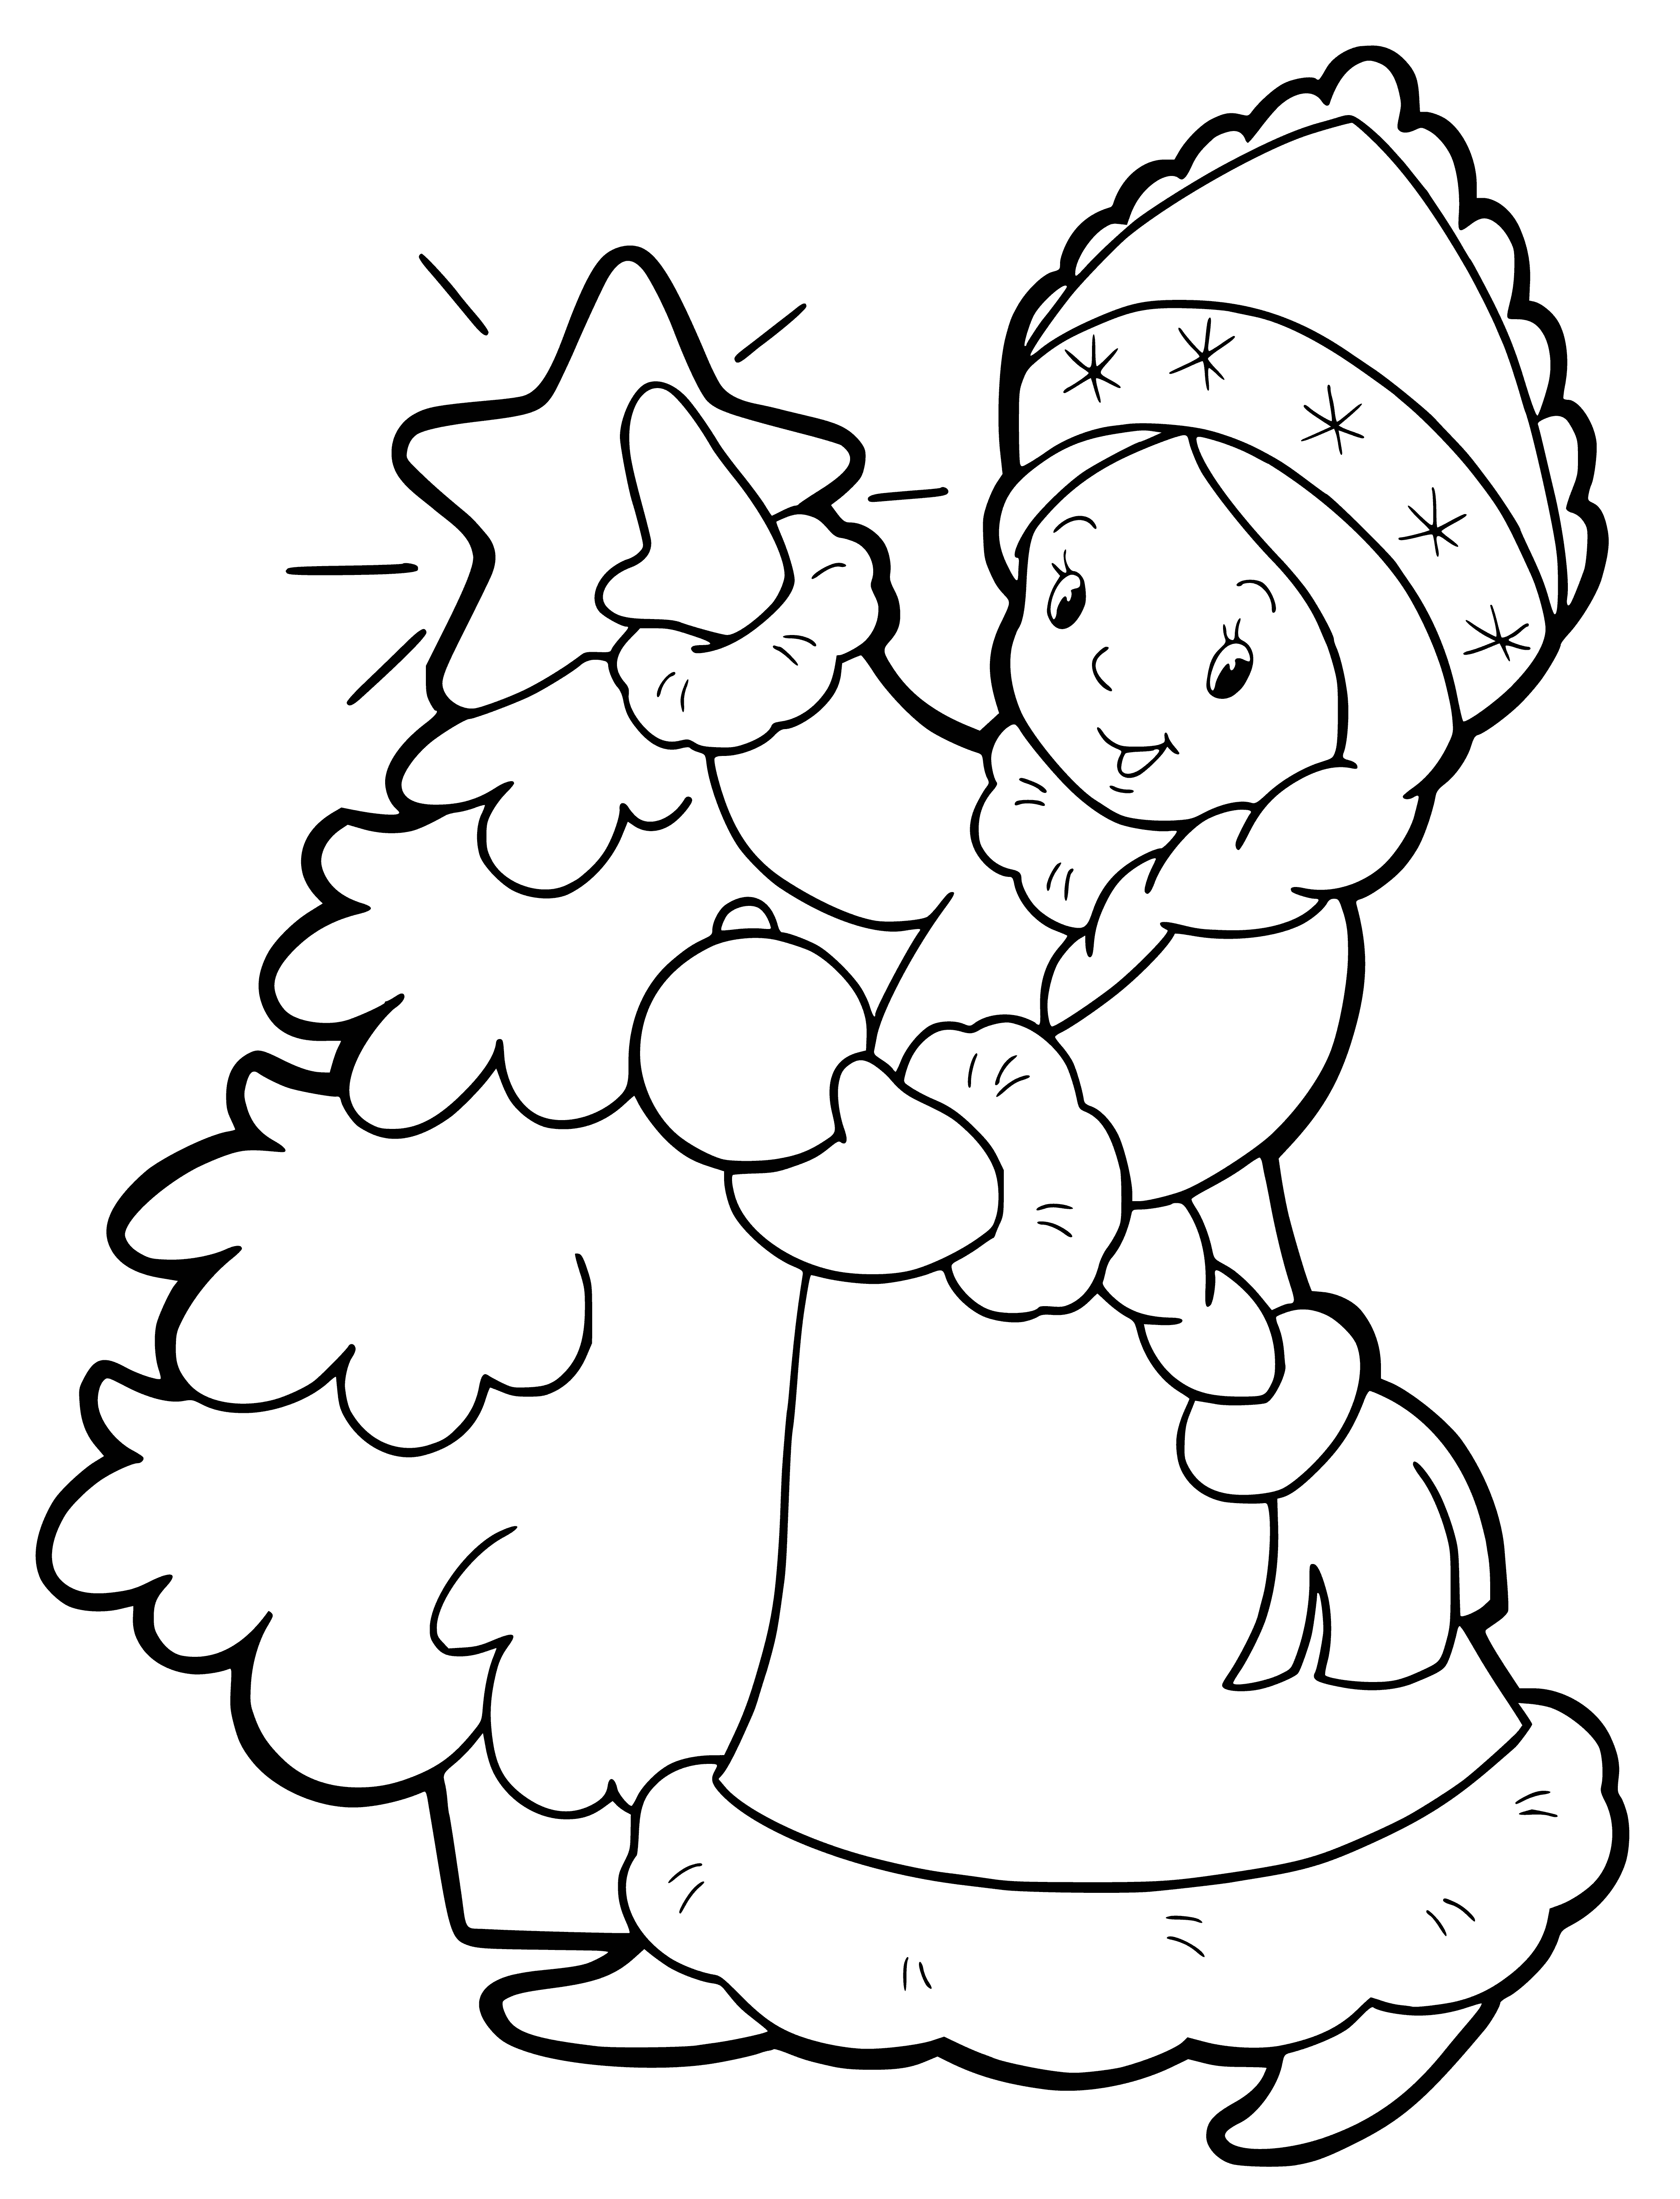 coloring page: Slender maiden with white hair and blue dress stands before a Christmas tree, looking frosty and fragile like the winter sky.